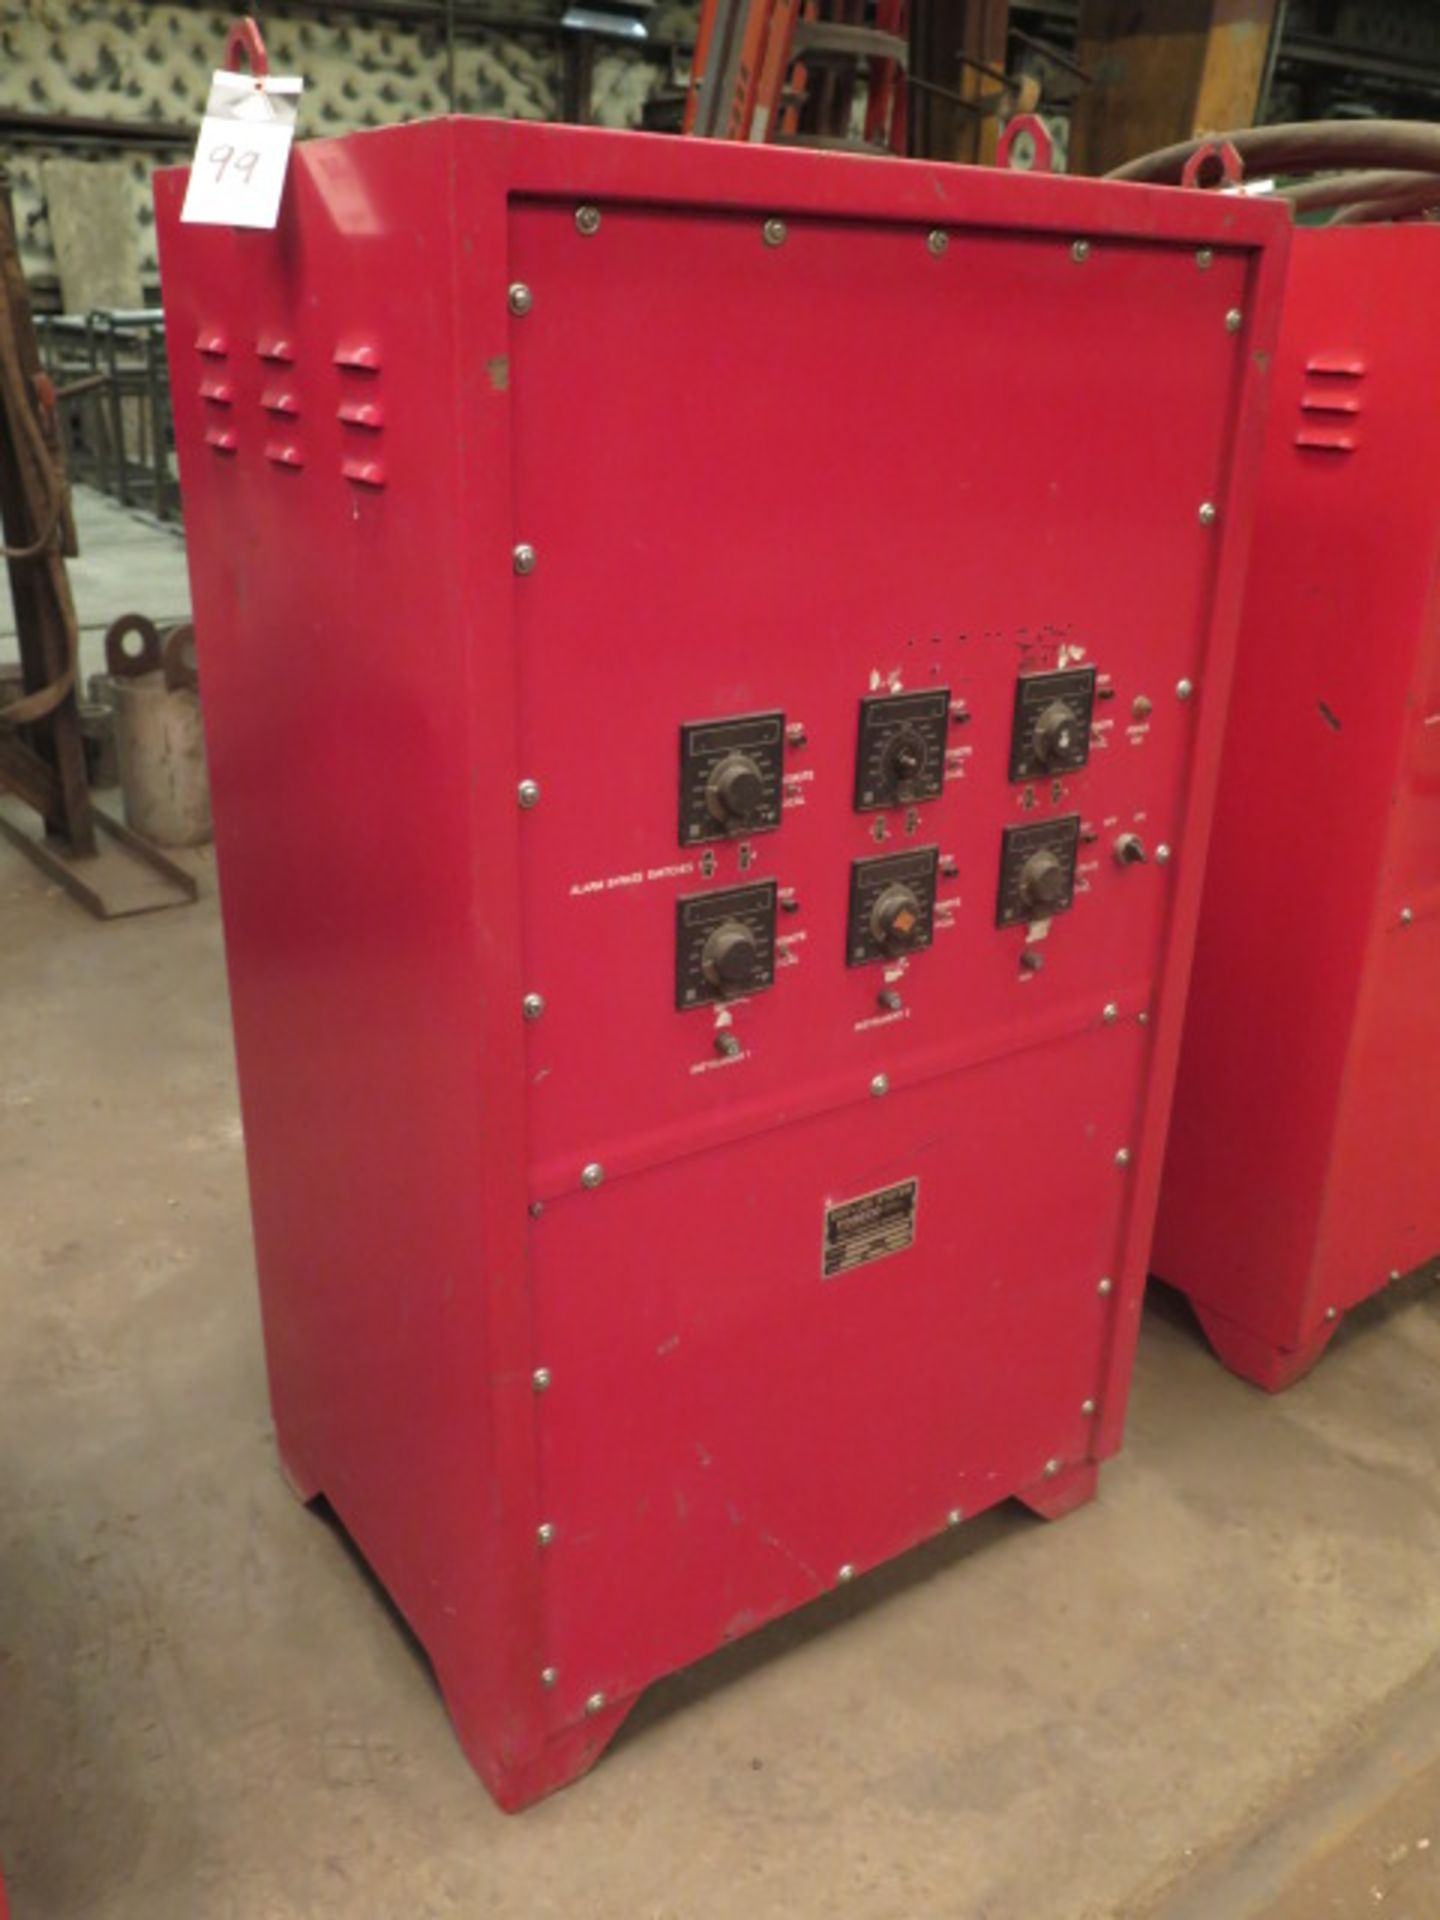 Fesco Heat Treat Division XLO/LEC System “6-Point Controller Slave” 120kW 6-Station Blanket Heater - Image 2 of 4